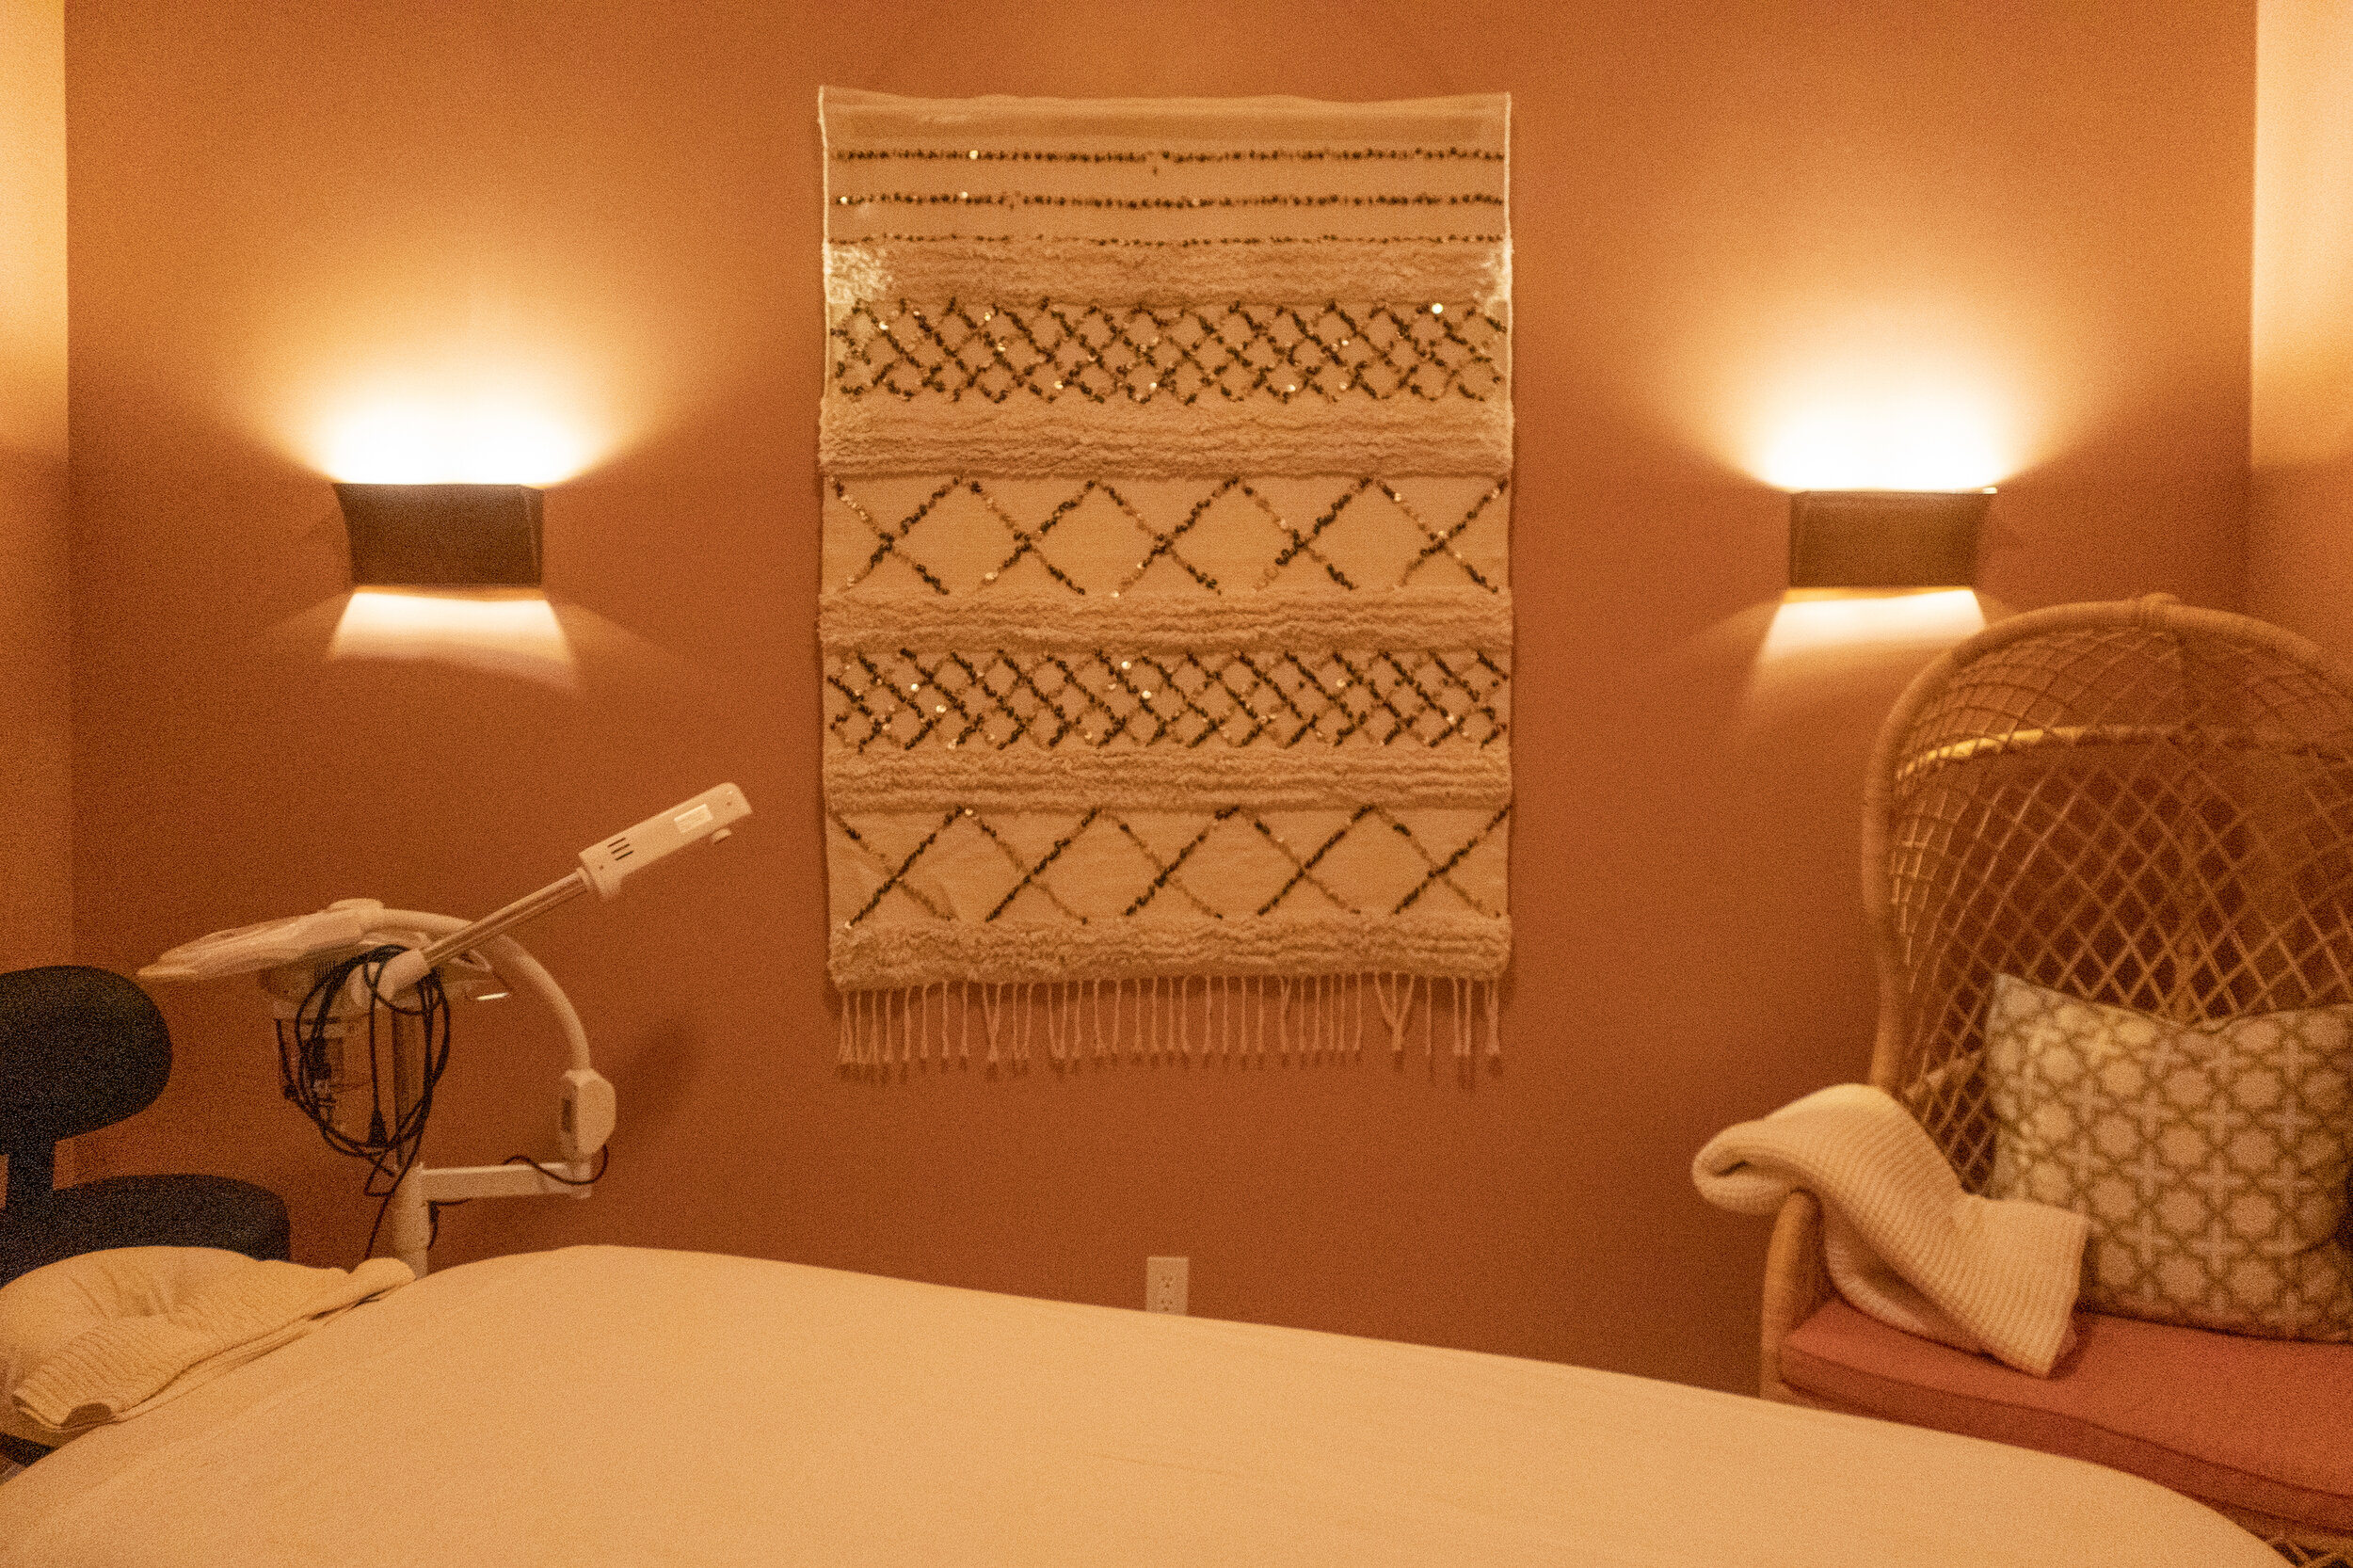   One of the treatment rooms at the Moroccan Spa at Sands Hotel &amp; Spa  